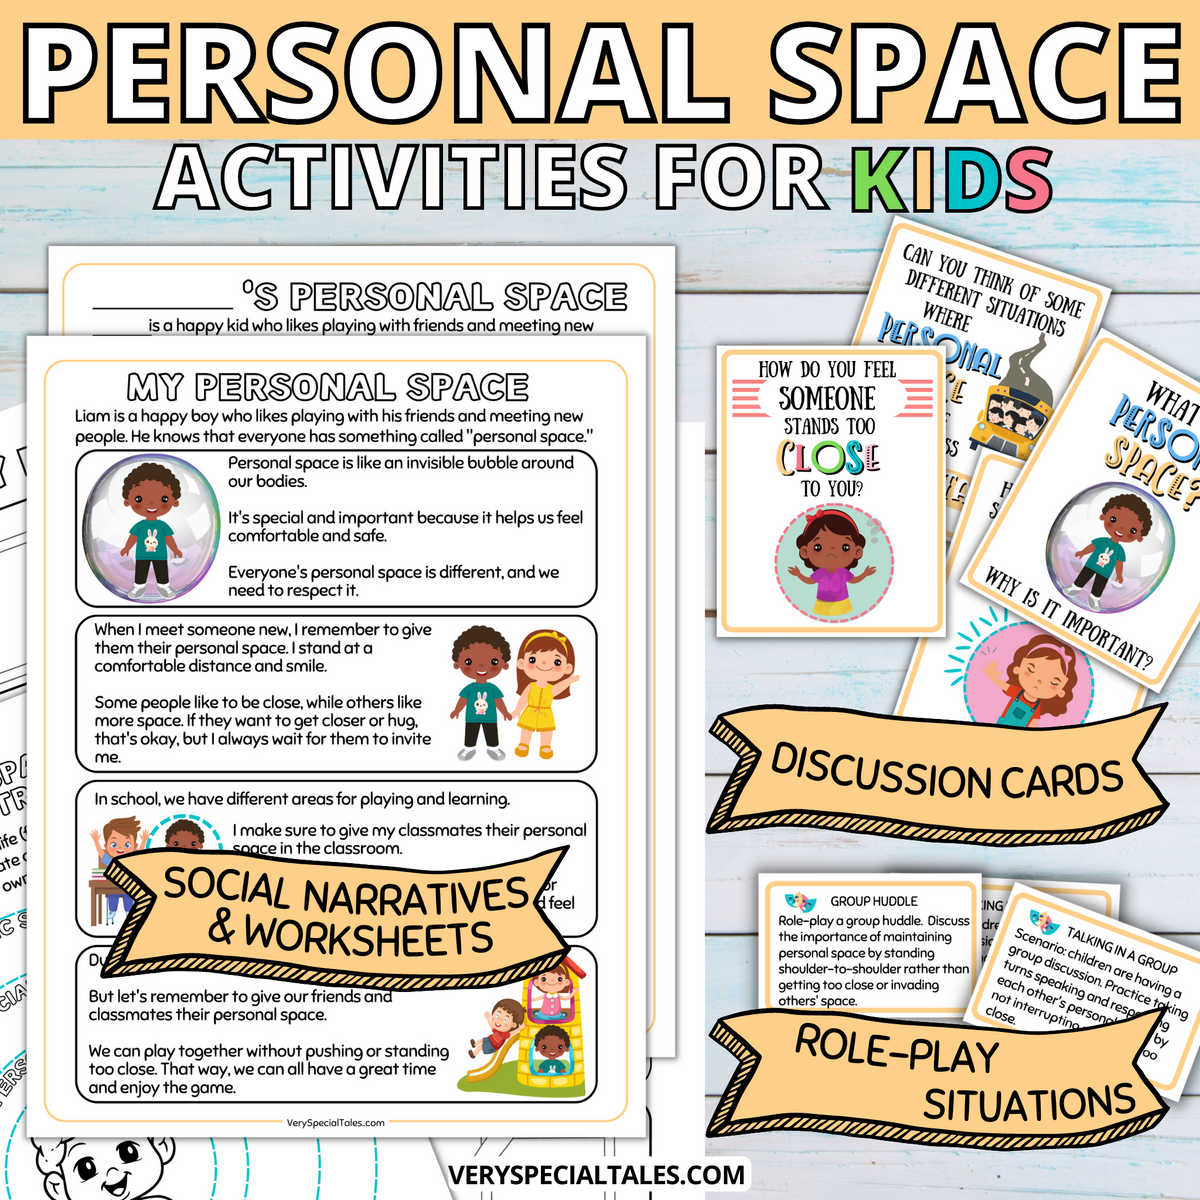 Worksheets from the Personal Space Activities for Kids product, containing playful illustrations of children playing, and flashcards.